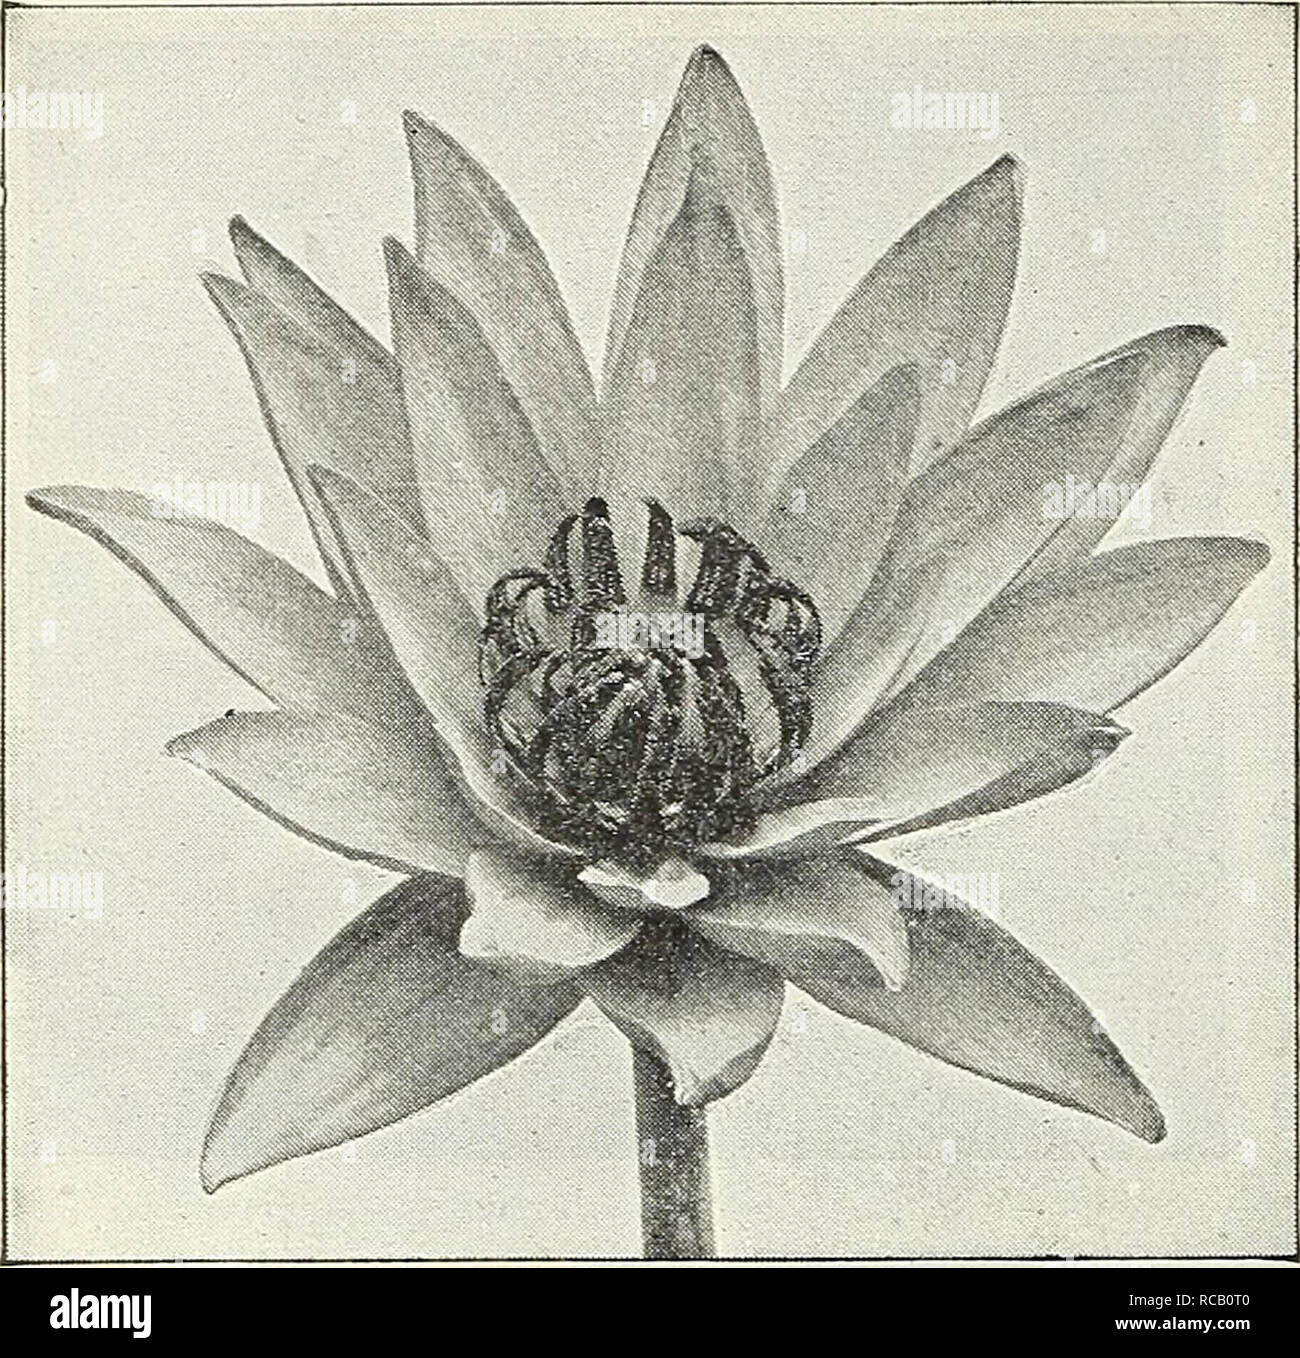 . Dreer's garden book : 1905. Seeds Catalogs; Nursery stock Catalogs; Gardening Equipment and supplies Catalogs; Flowers Seeds Catalogs; Vegetables Seeds Catalogs; Fruit Seeds Catalogs. 122. Frank Tkelease. Kewensis. Leaves dark green, slightly bronzy,with a few brown blotches; young leaves more spotted on surface. Light pink flowers 6 to 8 inches across. $LoO each. Lotus (-V. (keymails D.C.). The White Lotus, leaves d.irk, glossy green, 12 to 20 inches in diameter. Flowers white, the broad outer petals suffused pink ; petals concave; flowers vary from 5 to 10 inches in diameter; a robust spe- Stock Photo